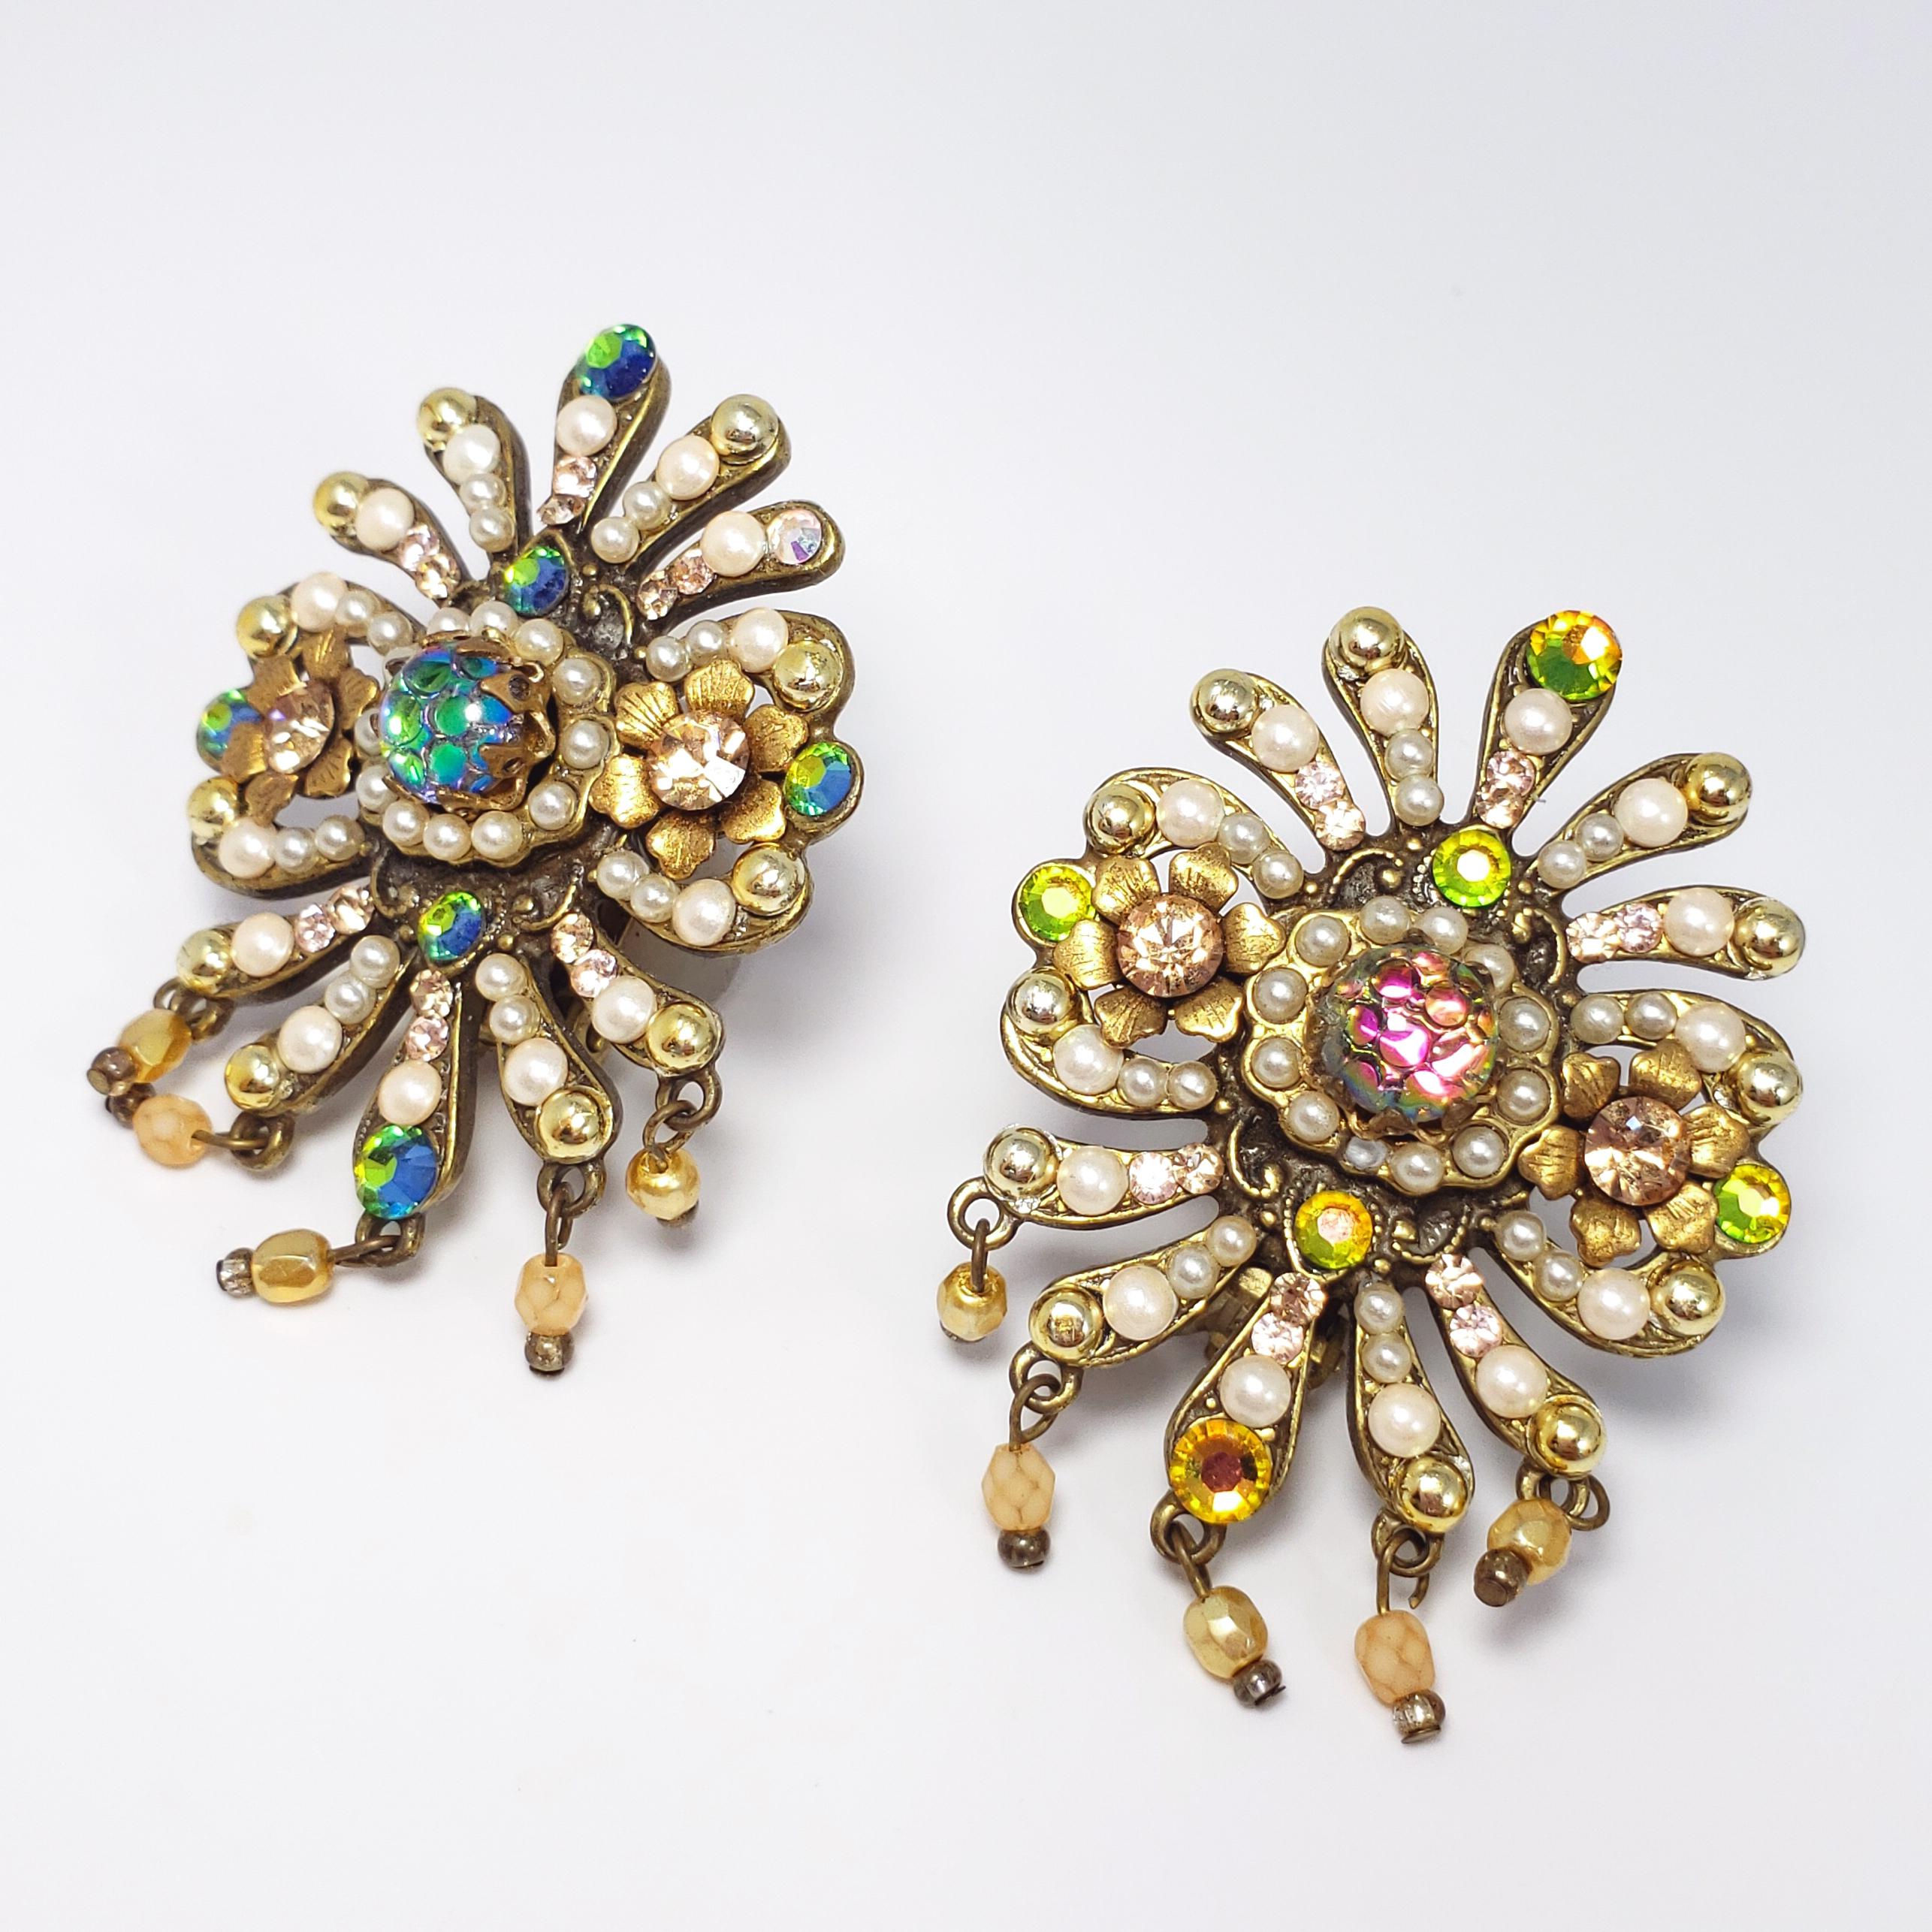 A pair of fabulous and bright floral-themed earrings by Michal Negrin. A vintage design from the 1980s-1990s, when Michal Negrin first began making jewelry. Features floral motifs, accented with faux pearls, champagne colored chaton crystals, and